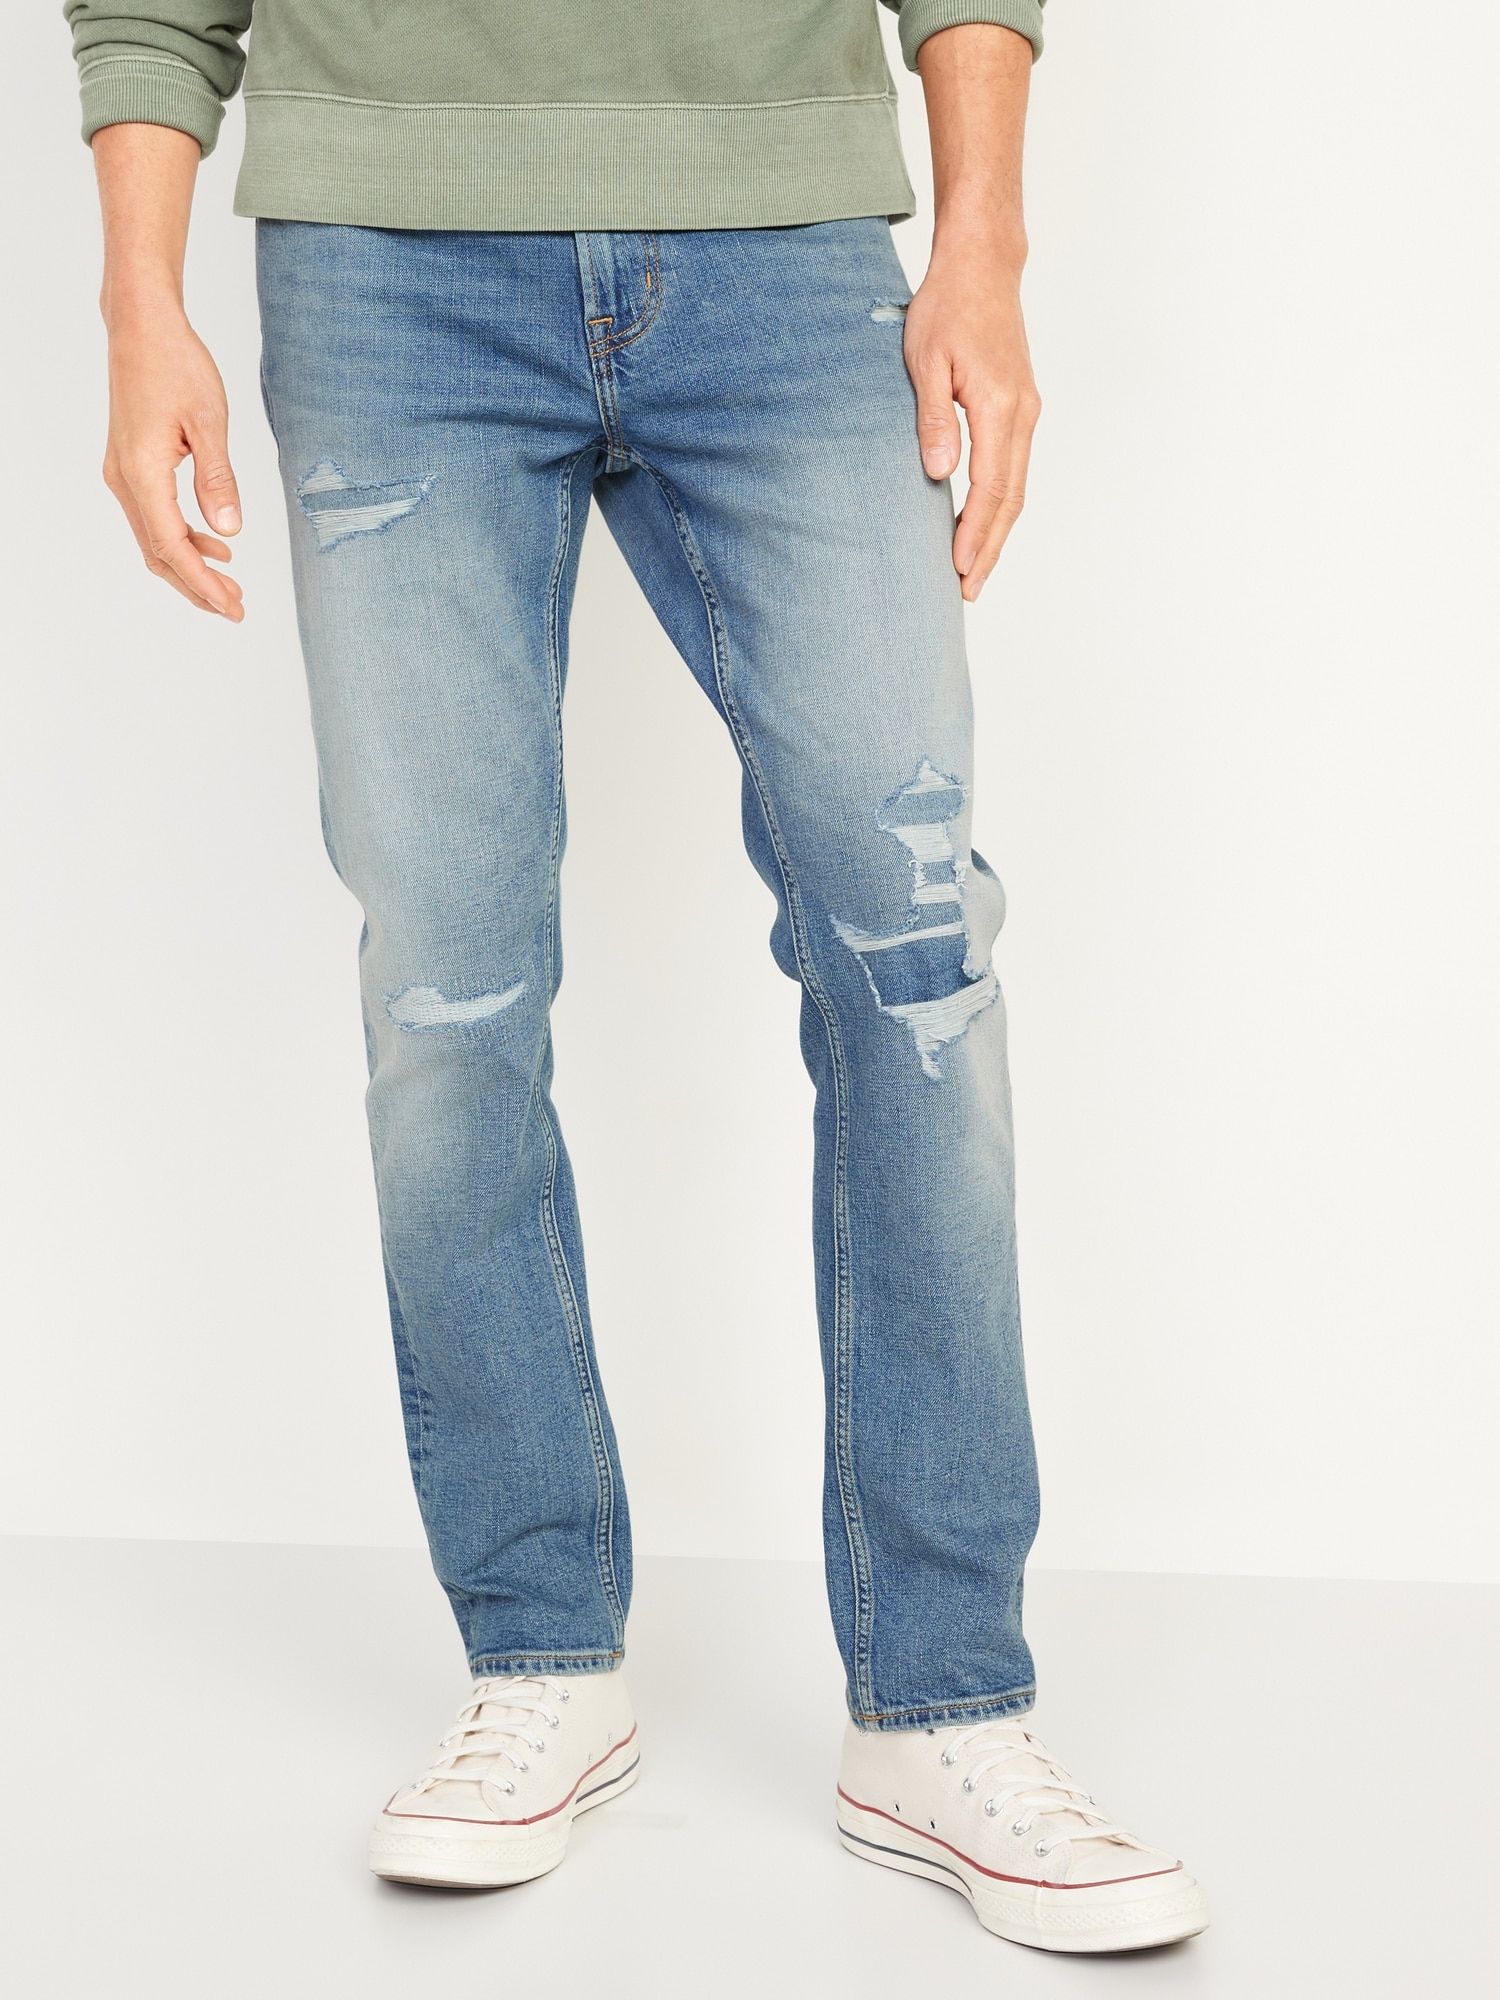 Ripped Baggy Jeans | BOOGZEL CLOTHING – Boogzel Clothing